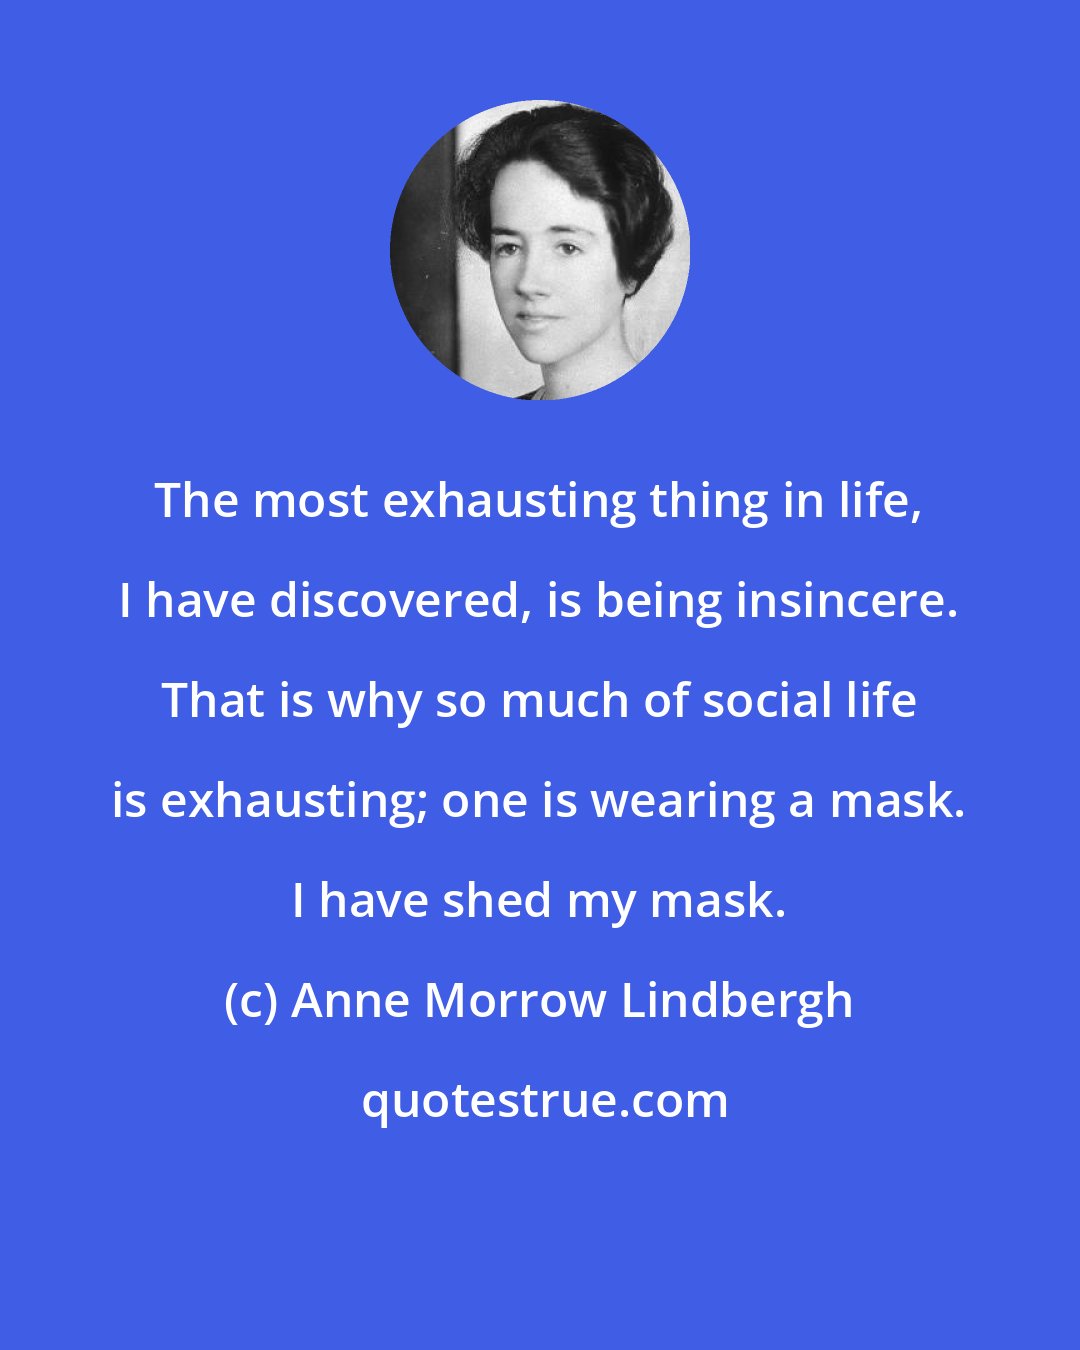 Anne Morrow Lindbergh: The most exhausting thing in life, I have discovered, is being insincere. That is why so much of social life is exhausting; one is wearing a mask. I have shed my mask.